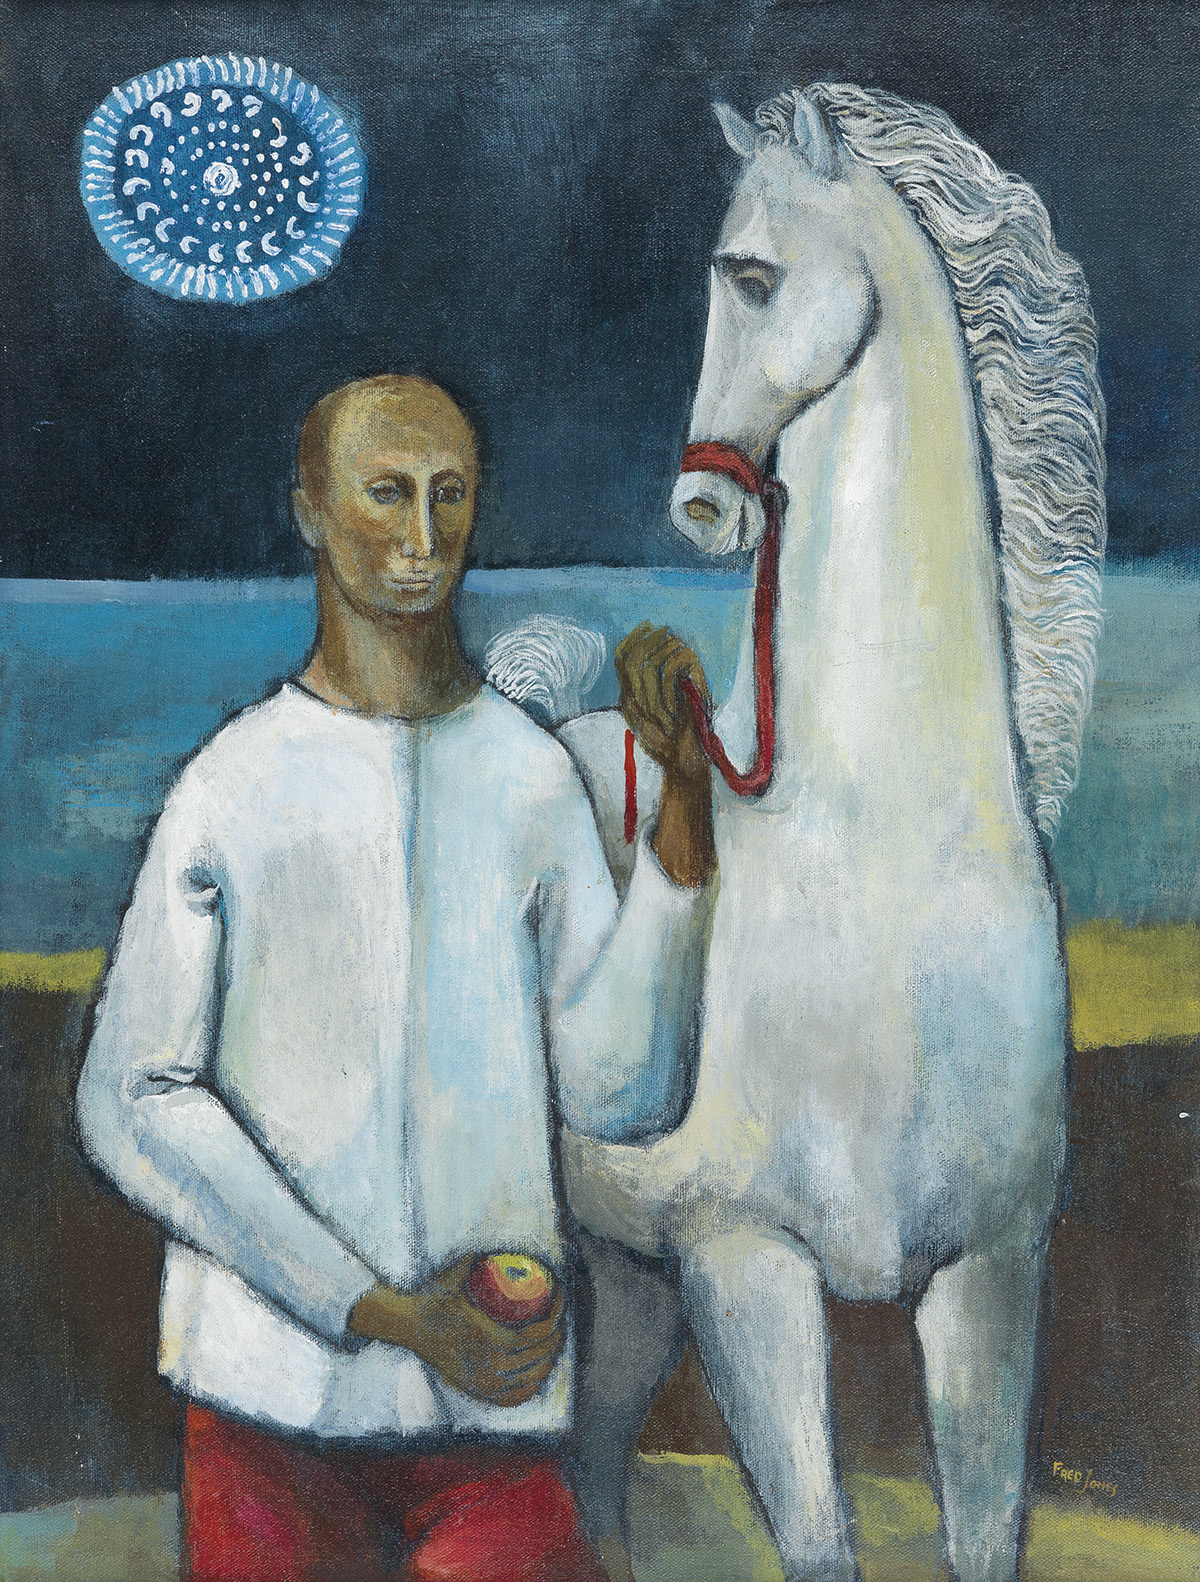 FREDERICK D. JONES (1914 - 2004 ) Untitled (Man with a Horse).